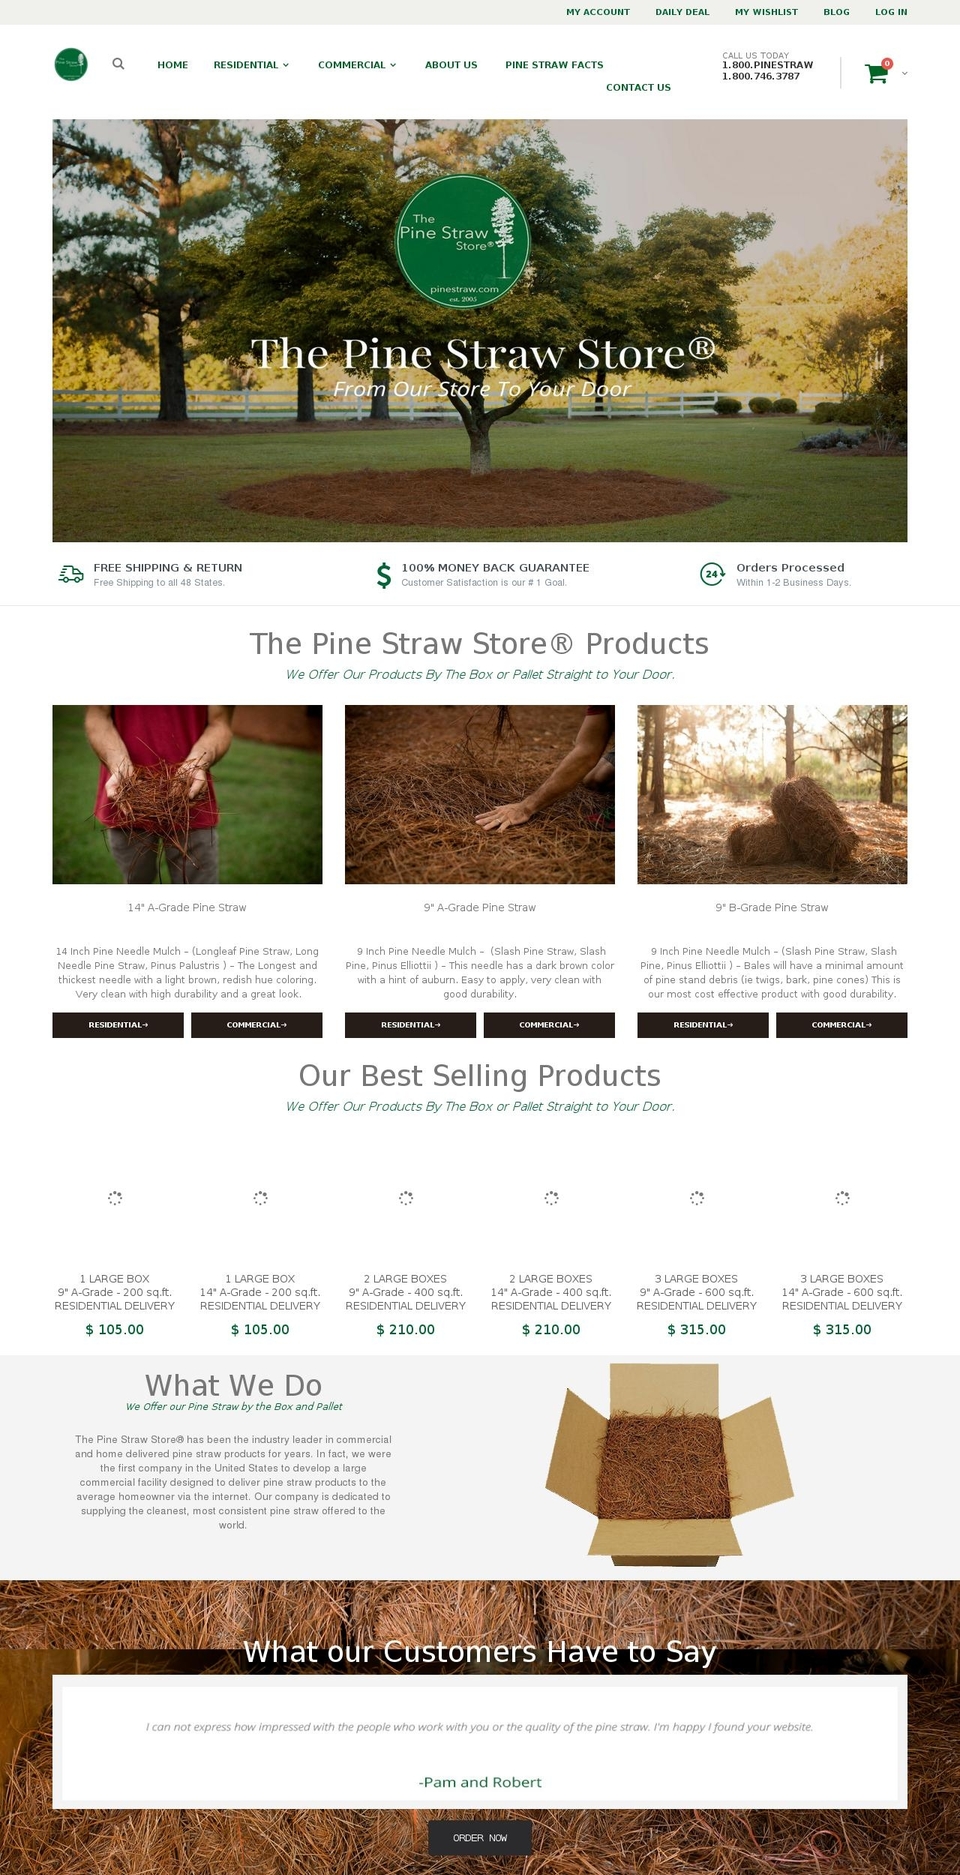 The Pine Straw Store Shopify theme site example 1800pinestrawstore.com